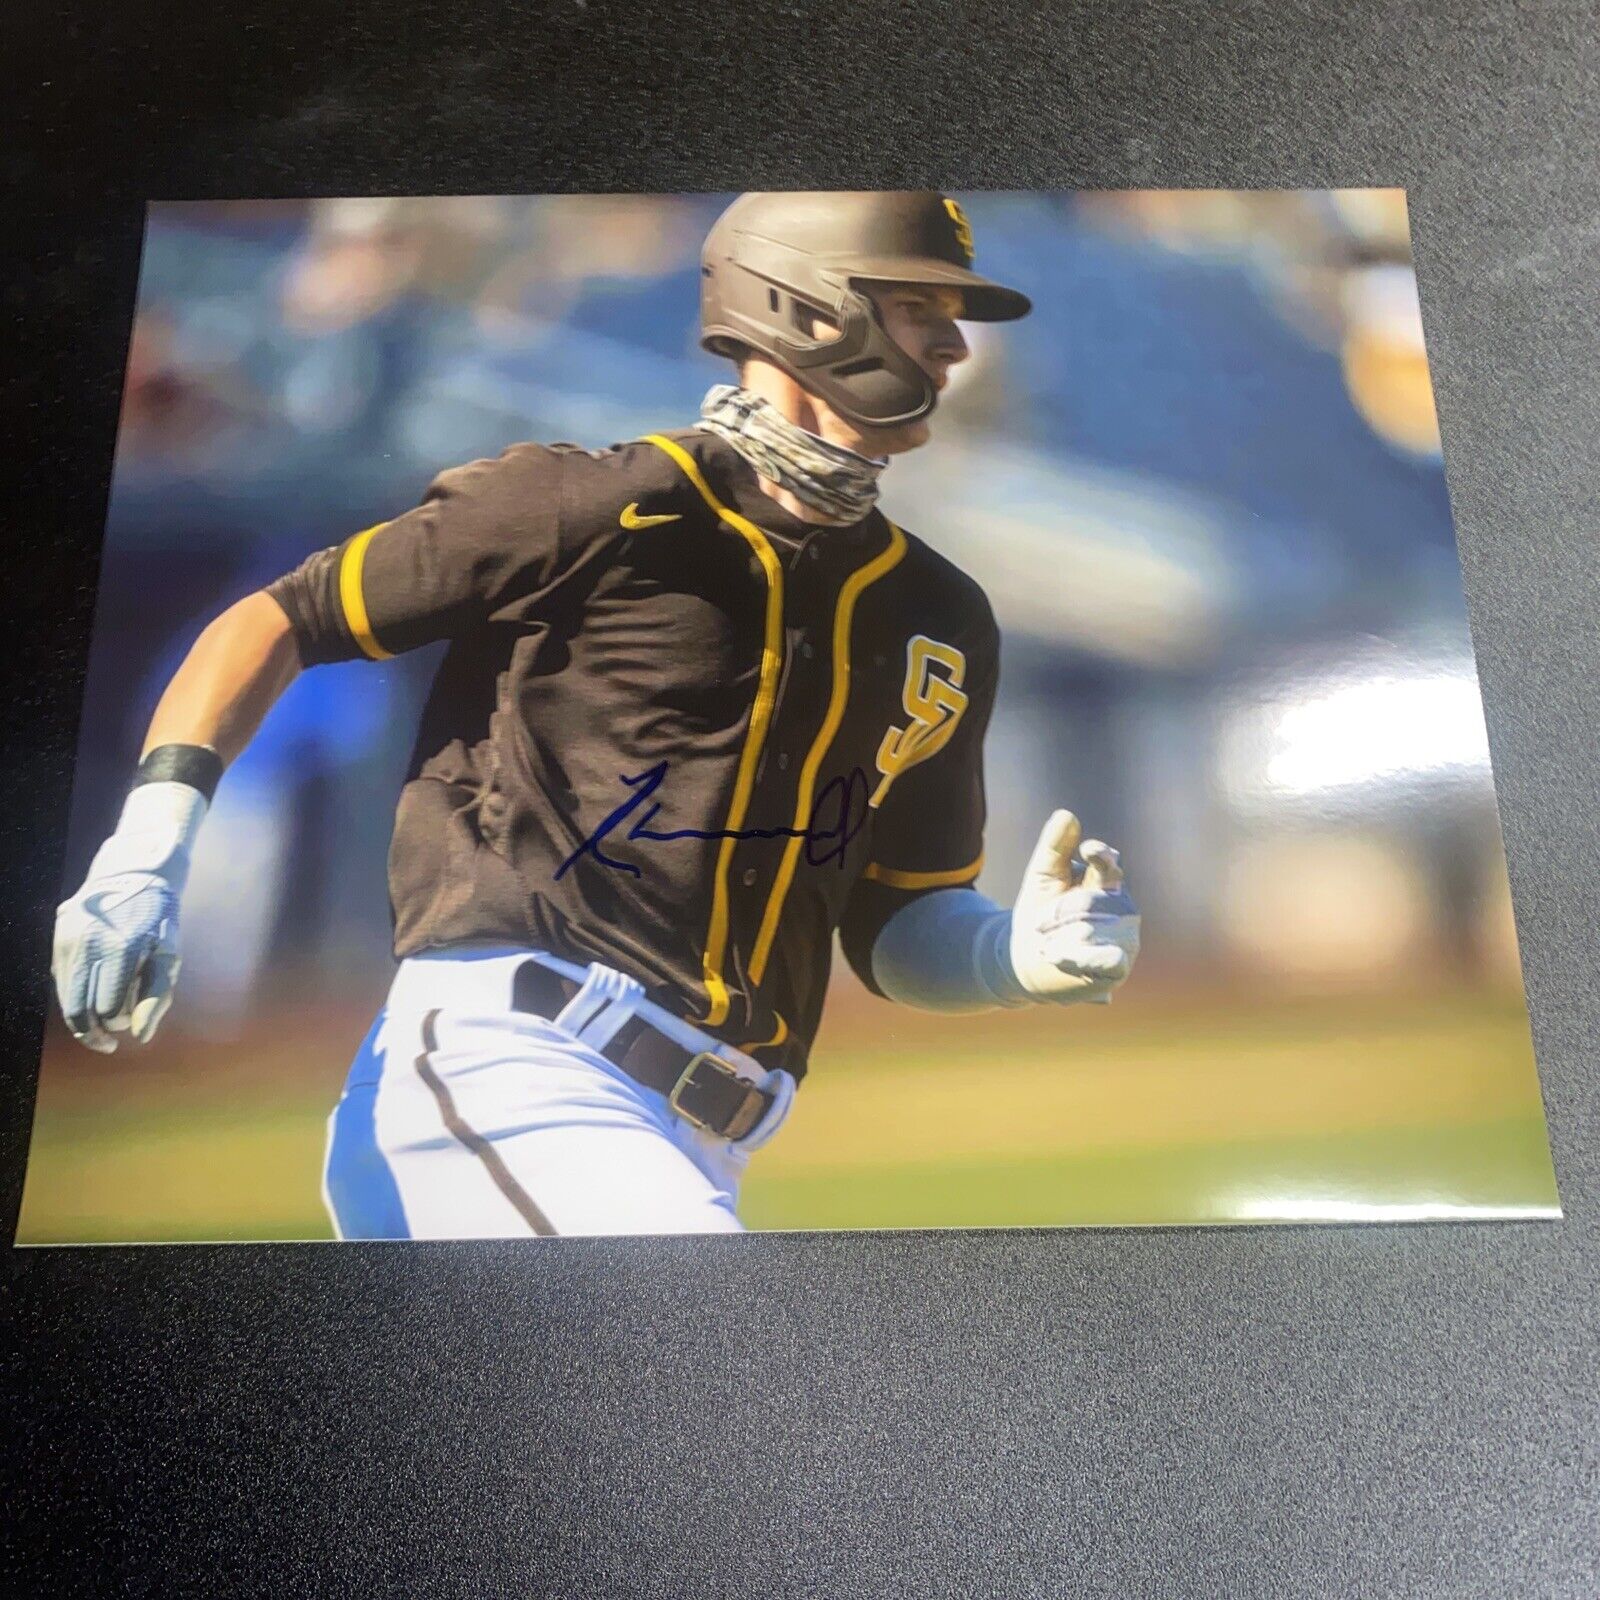 Robert Hassell Autographed Padres 8x10 Photo! Futures Game! Nats New Star!